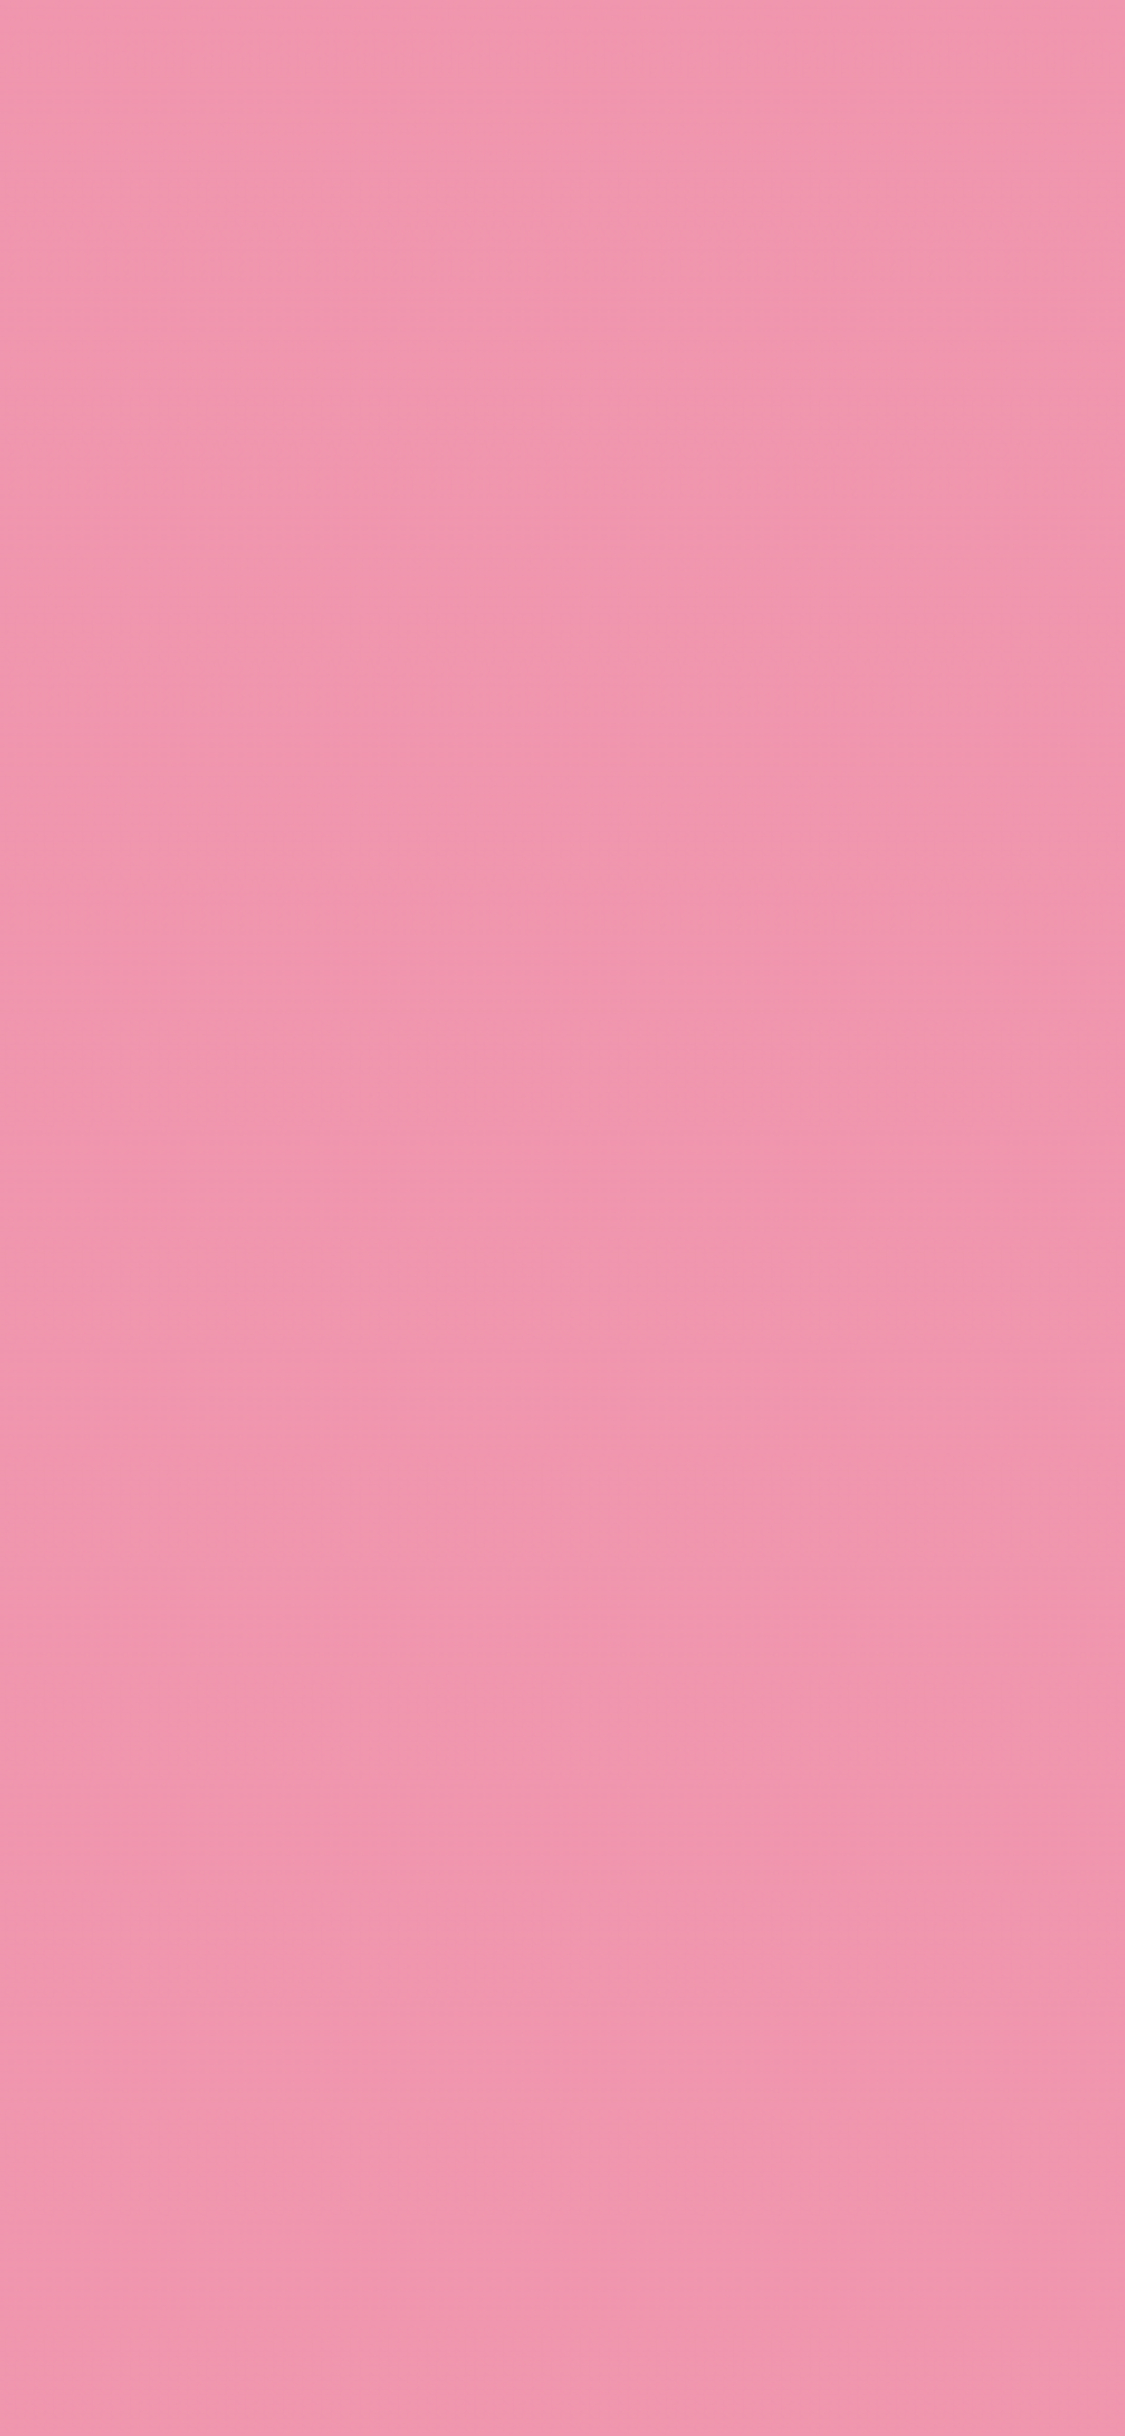 1125x2436 Pink Solid Color Wallpapers Top Free Pink Solid Color Backgrounds